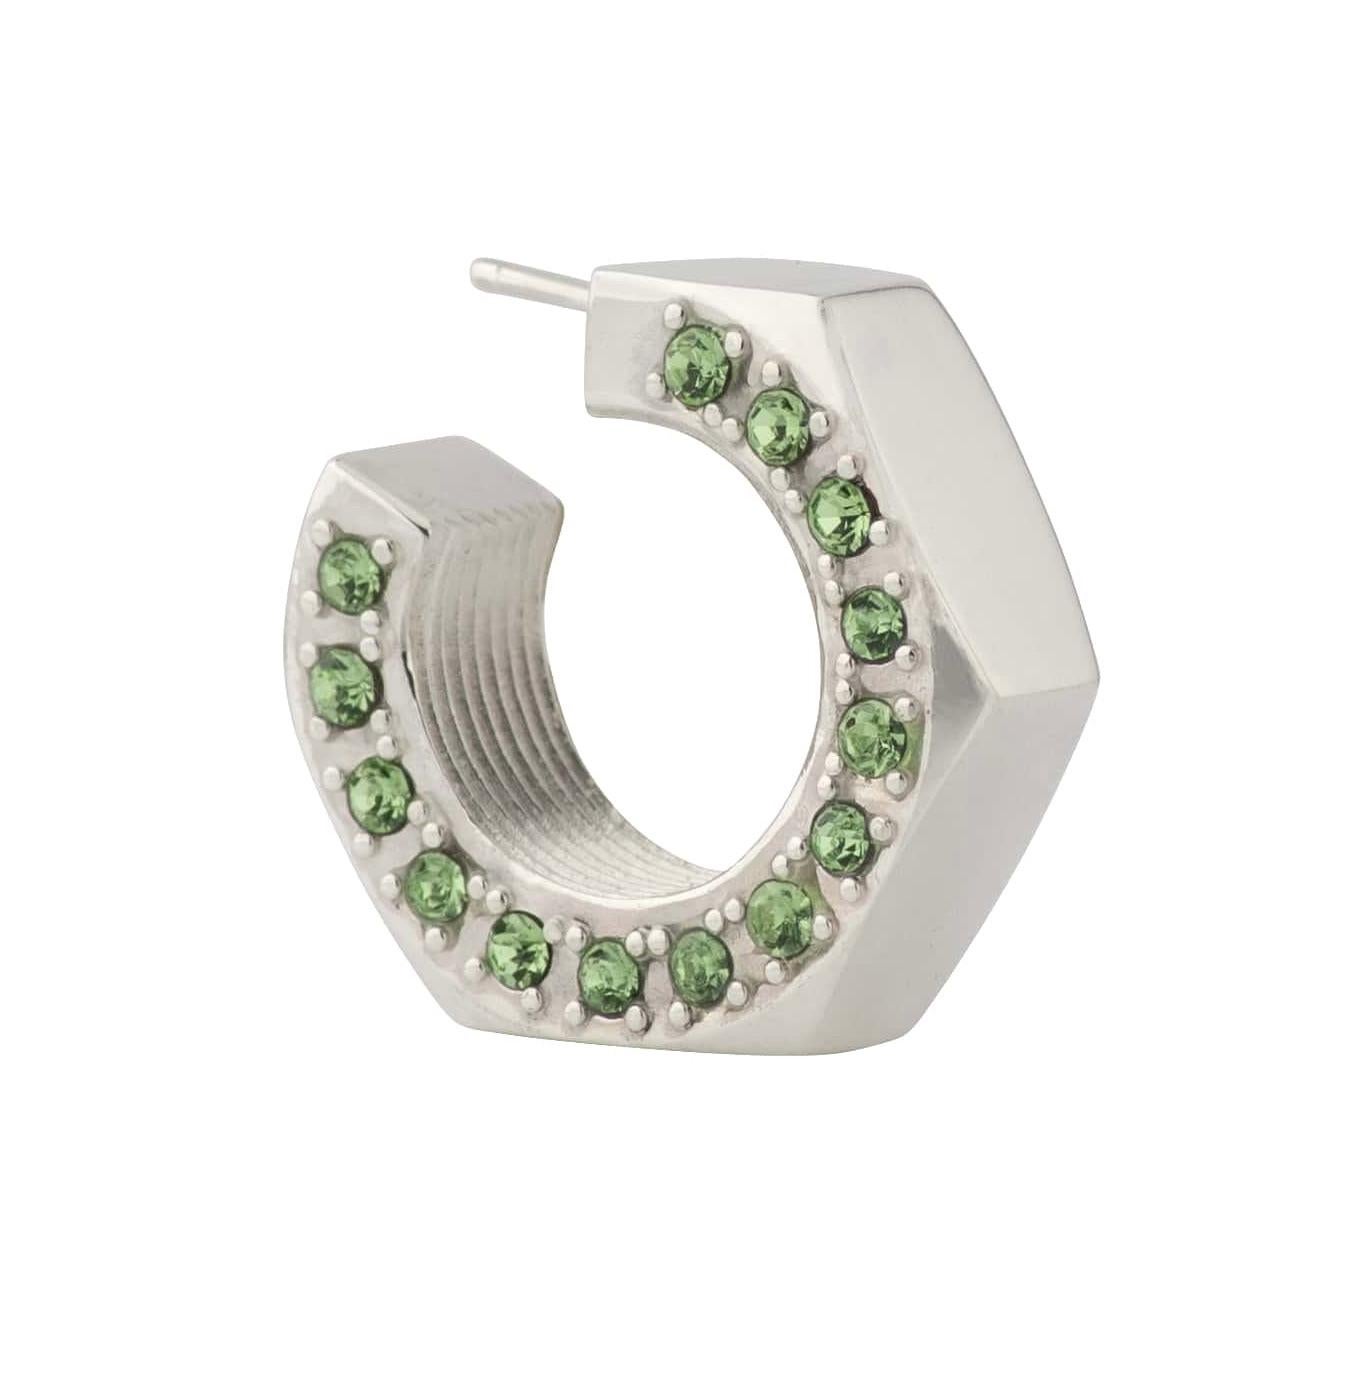 Hex nut shaped silver earrings with 2.75 mm peridot stones on one side of each earring.
.
Sold as a pair
For pierced ears
One size only
Type of closure: Traditional closure
Material: 925 Sterling Silver
Finishing: Silver plated
Measurements:
-